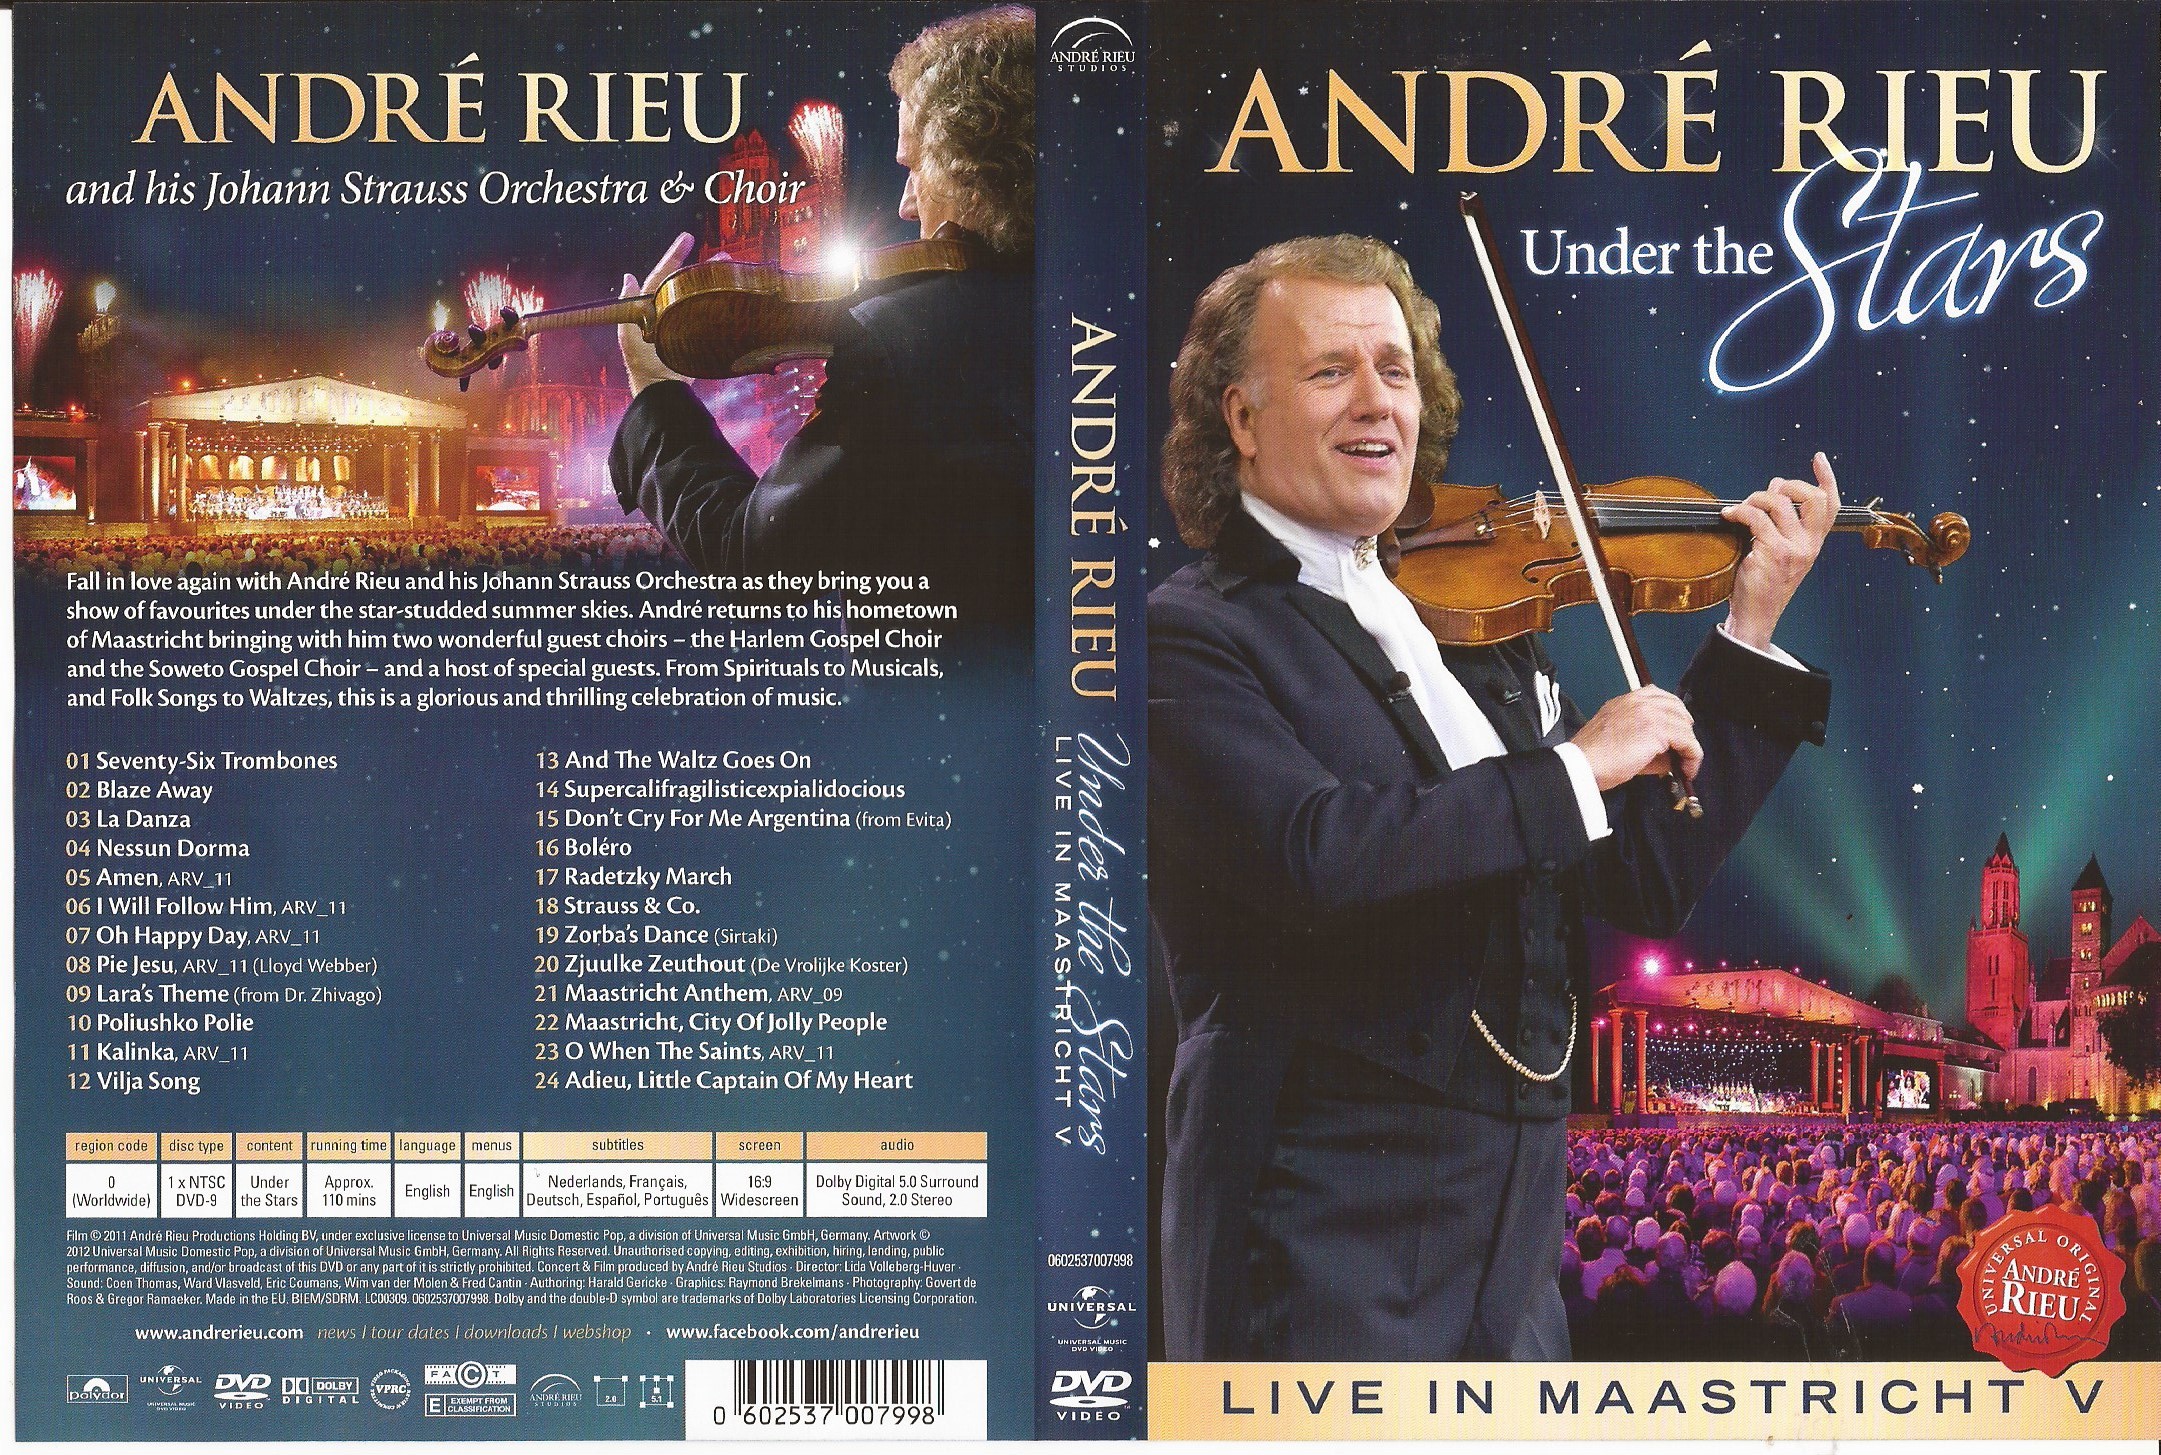 Andre Rieu - Under the Stars - Live in Maastricht